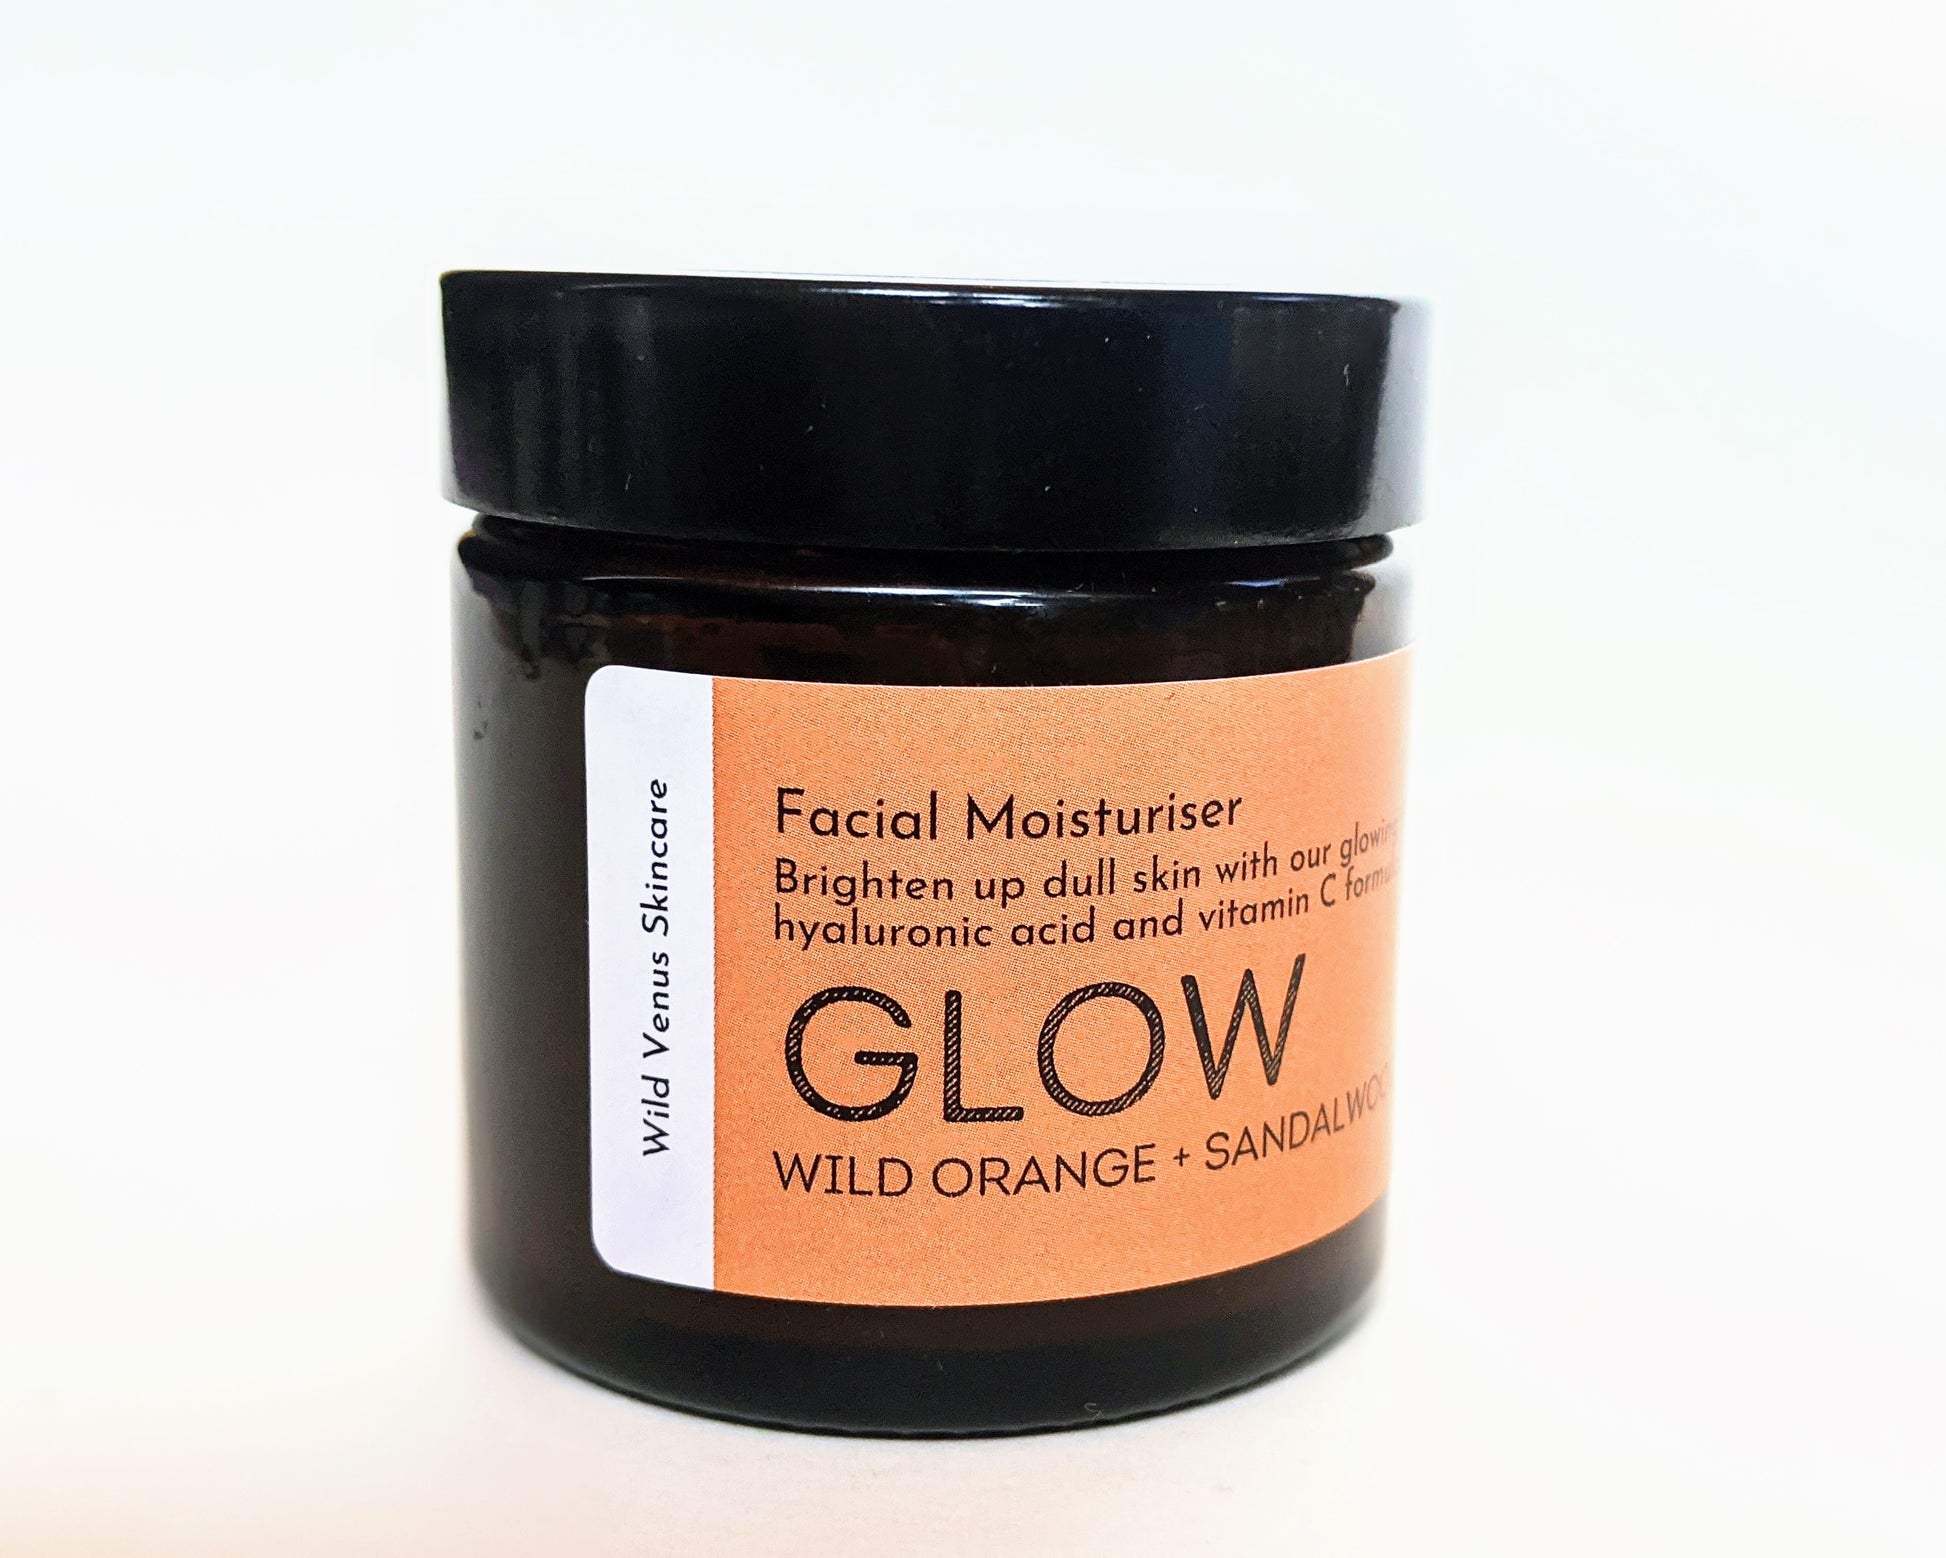 A closed jar of the GLOW facial moisturiser, shown from a side angle. 